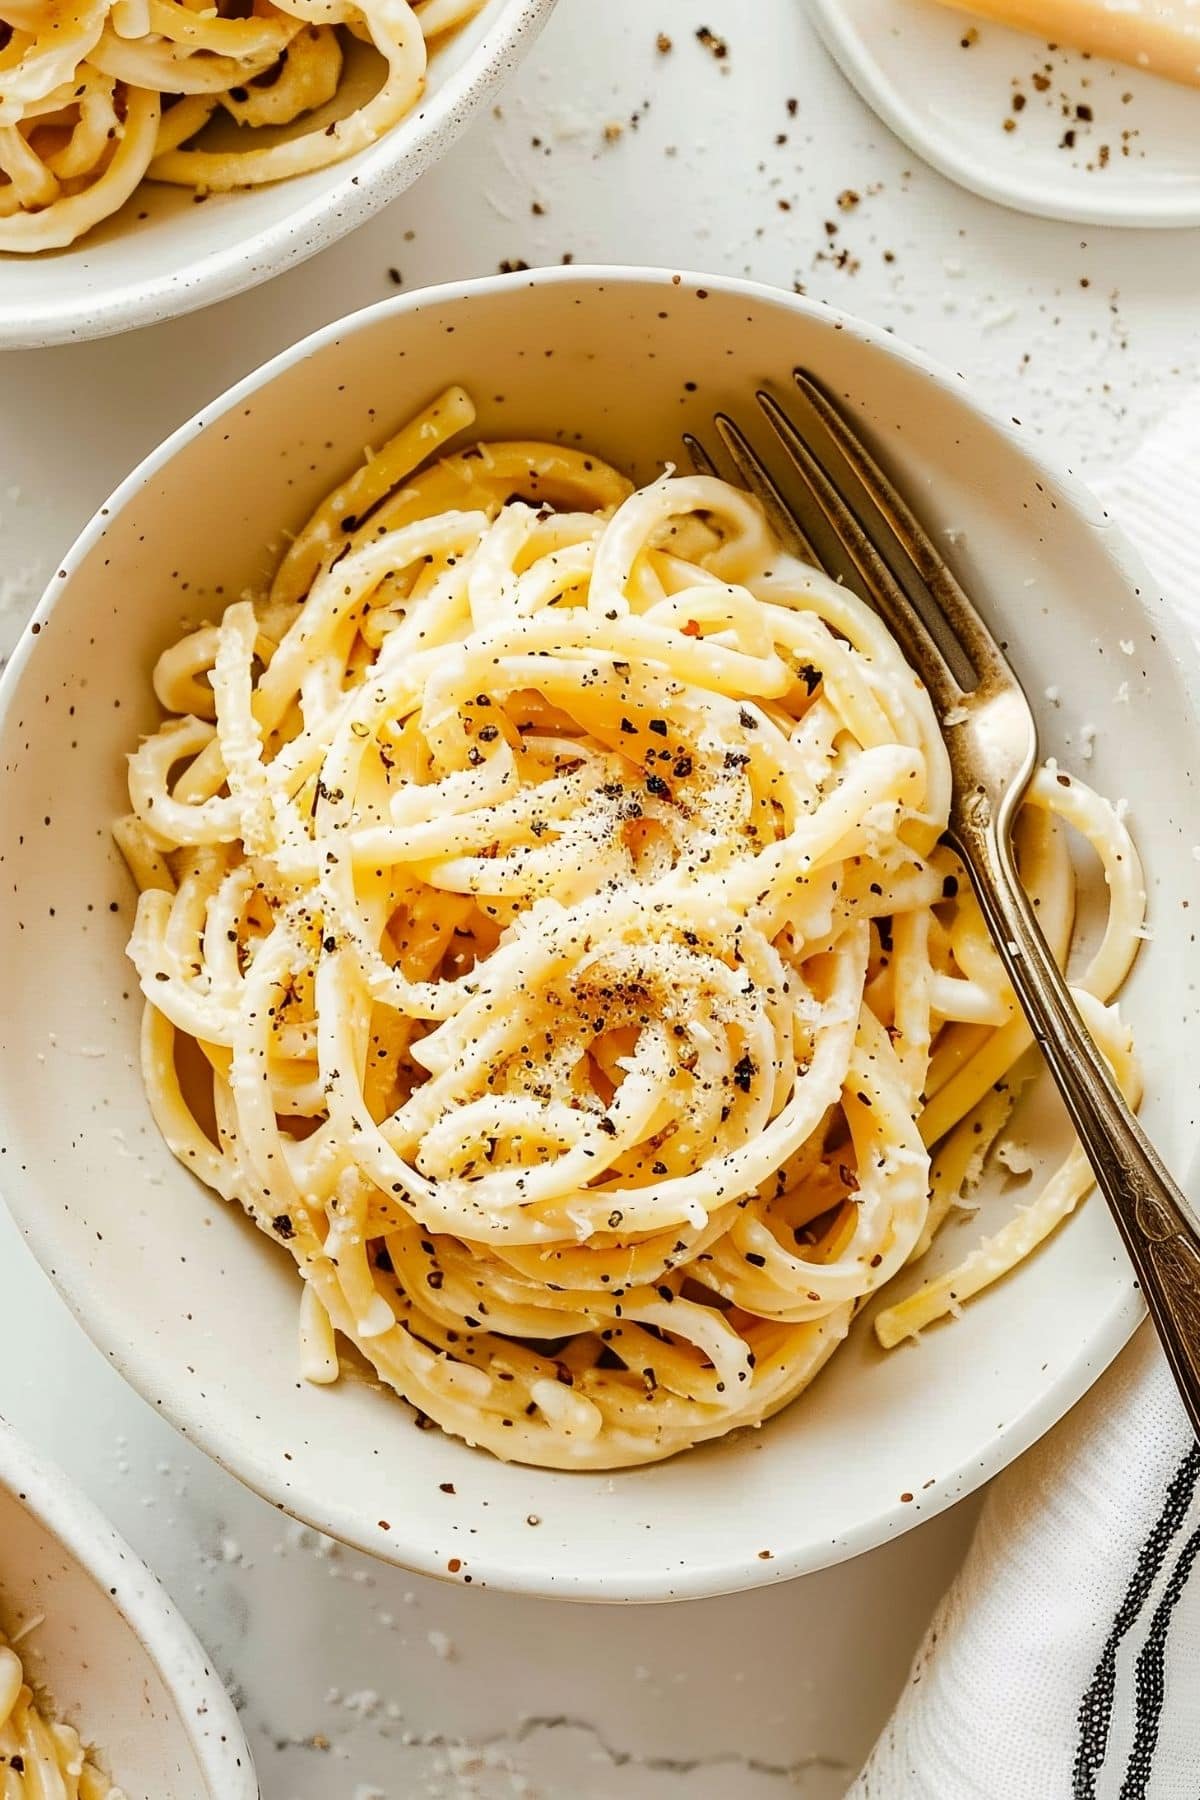 Top View of Three Bowls of Cacio e Pepe with a Fork